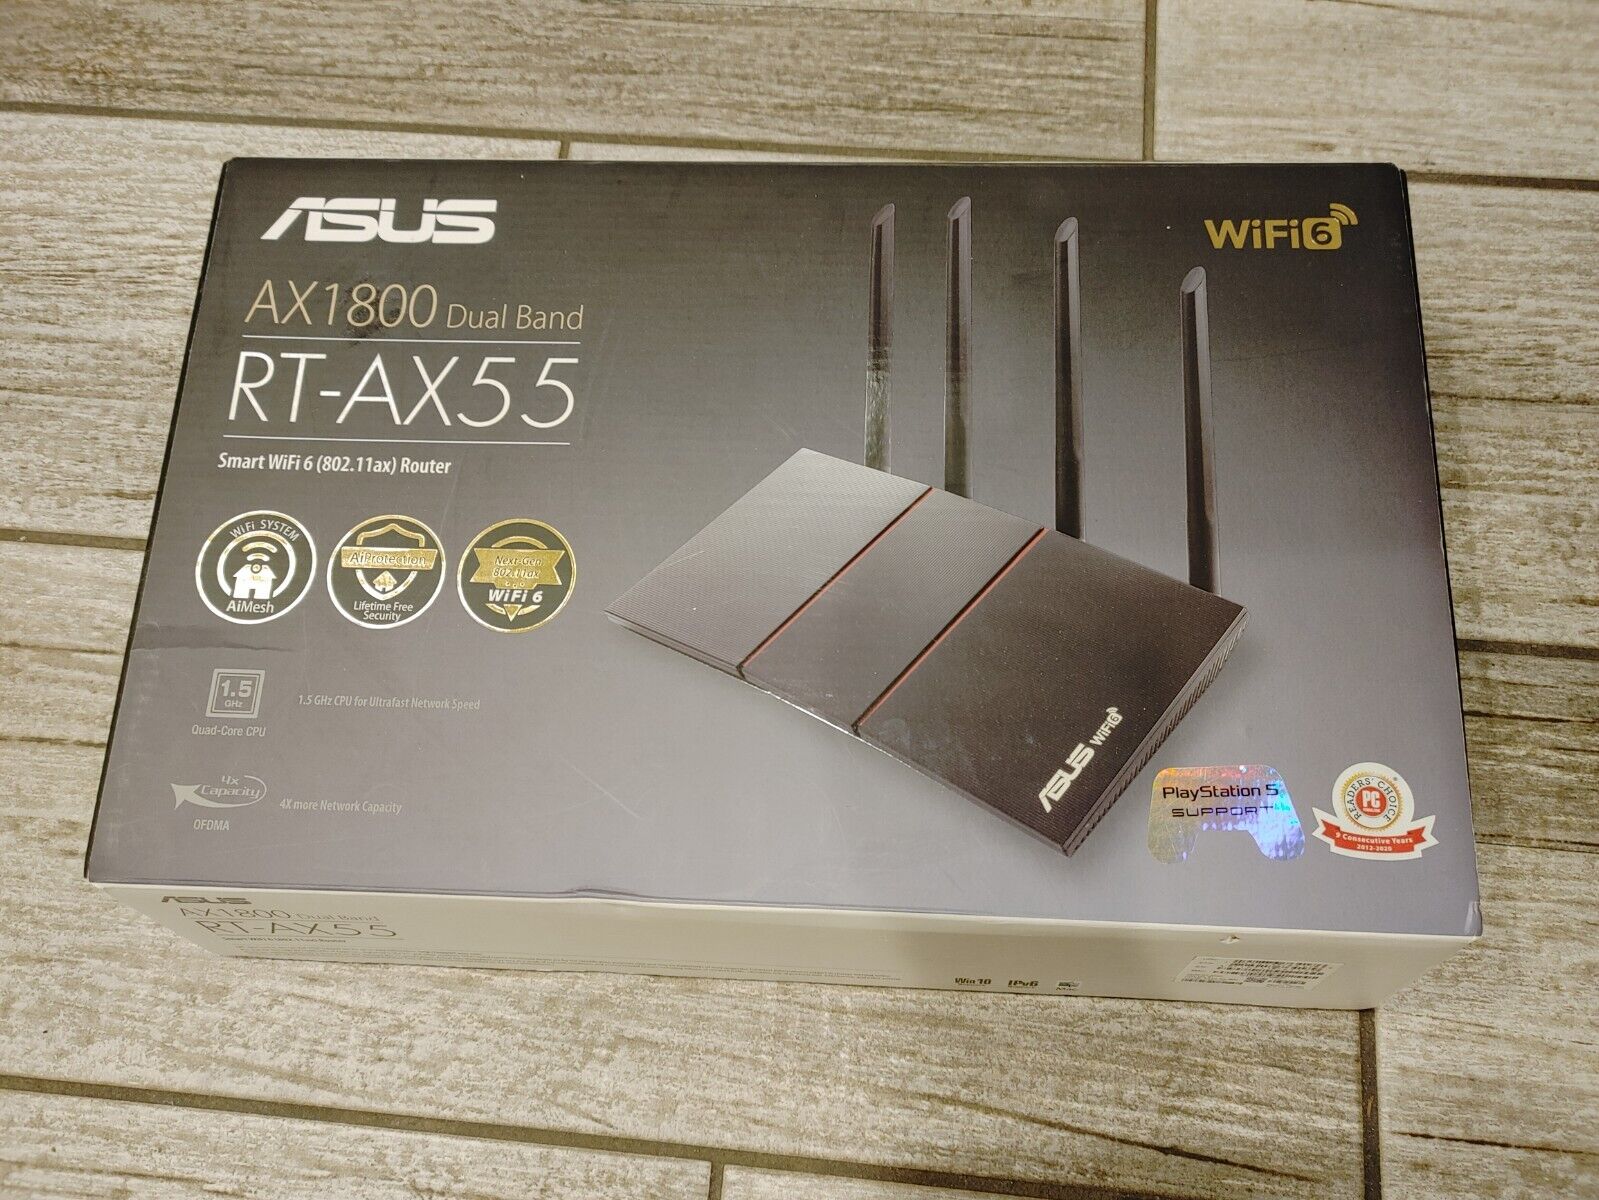 Empty Box for ASUS AX1800 Dual Band WiFi 6 Router - Black. Box only.